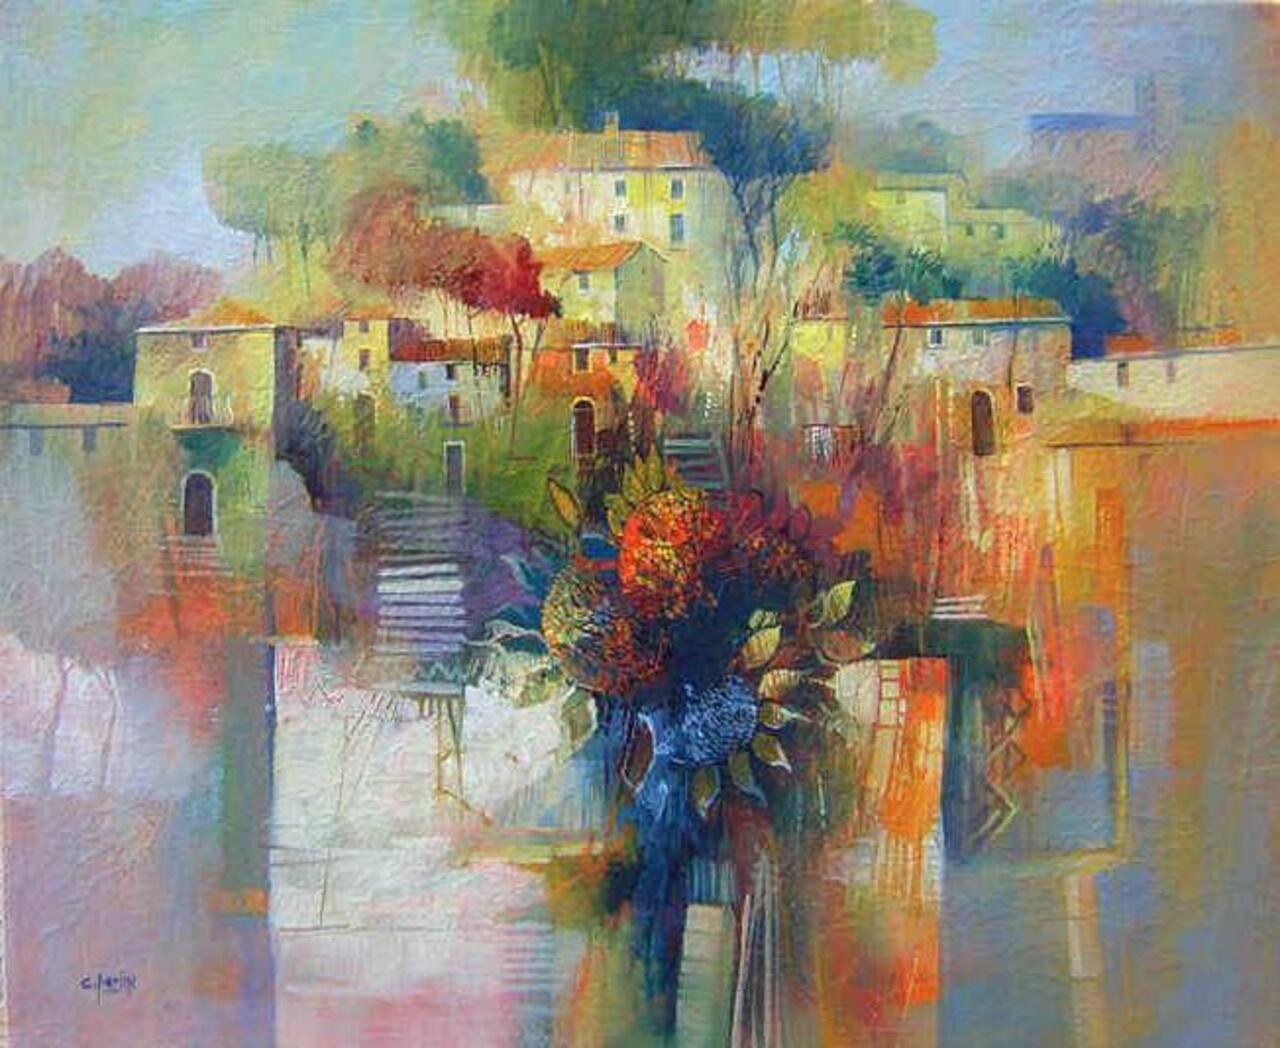 Painting by Claudio Perina - #pintura #art #artwit #twitart #fineart #painting http://t.co/grWuXHP1bs